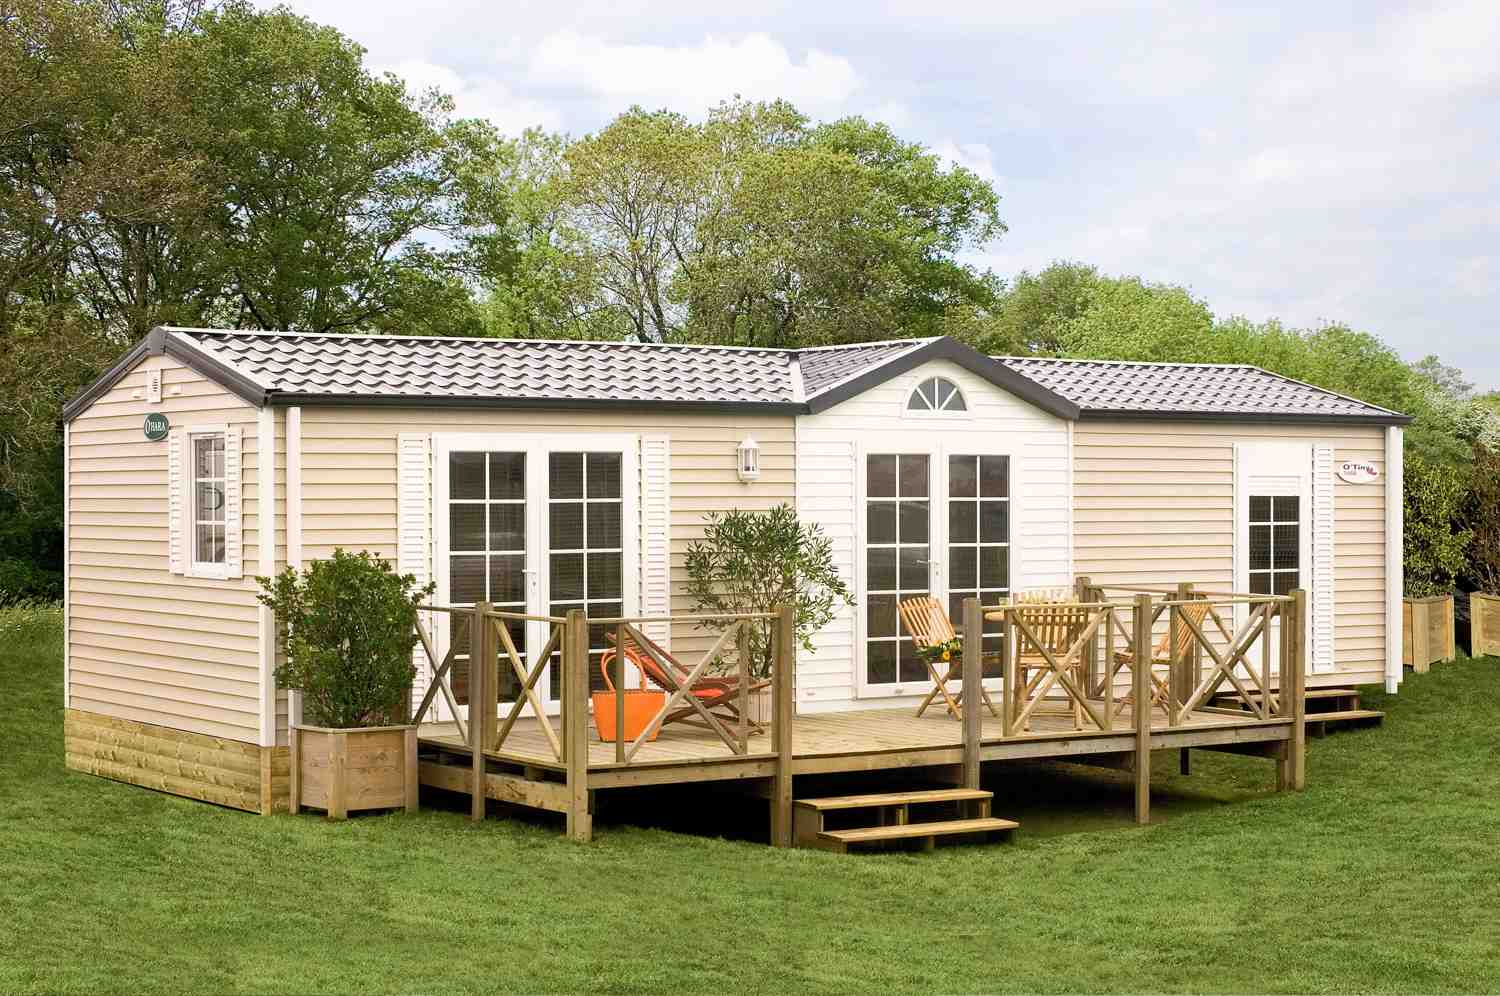 The Best Features For A Great Mobile Home